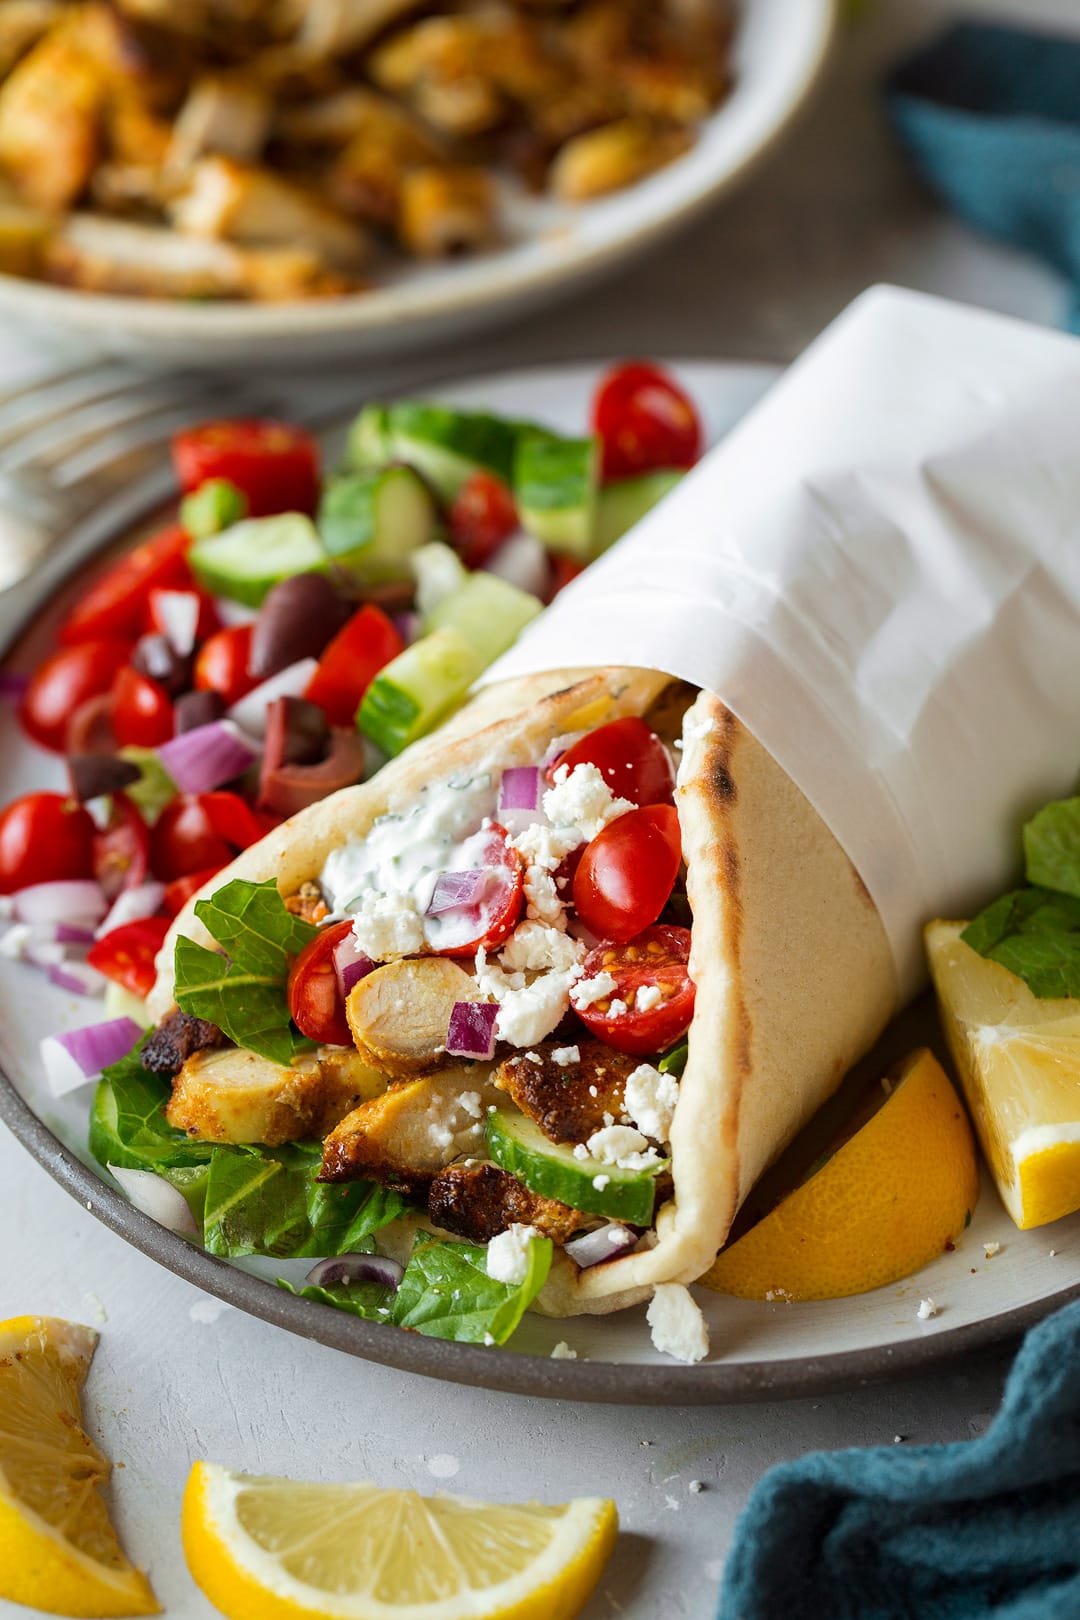 Chicken Shawarma shown here served in pita bread with a side of greek salad on a serving plate